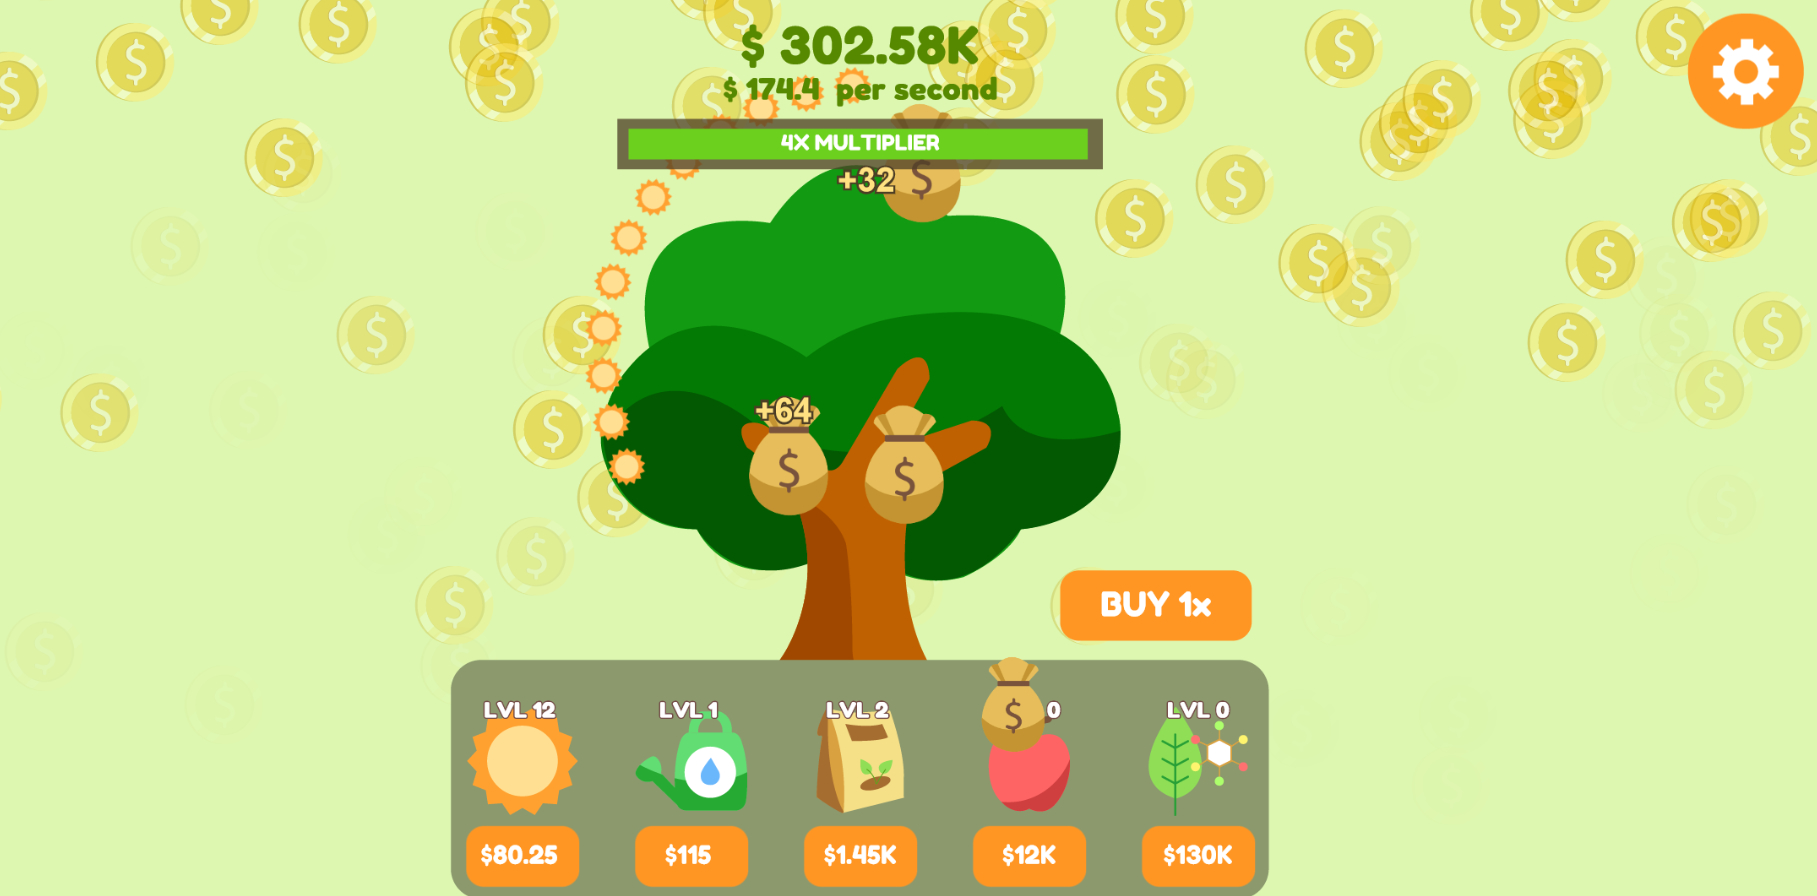 Mortgage Calculator Offers Free Online Money Games for Kids